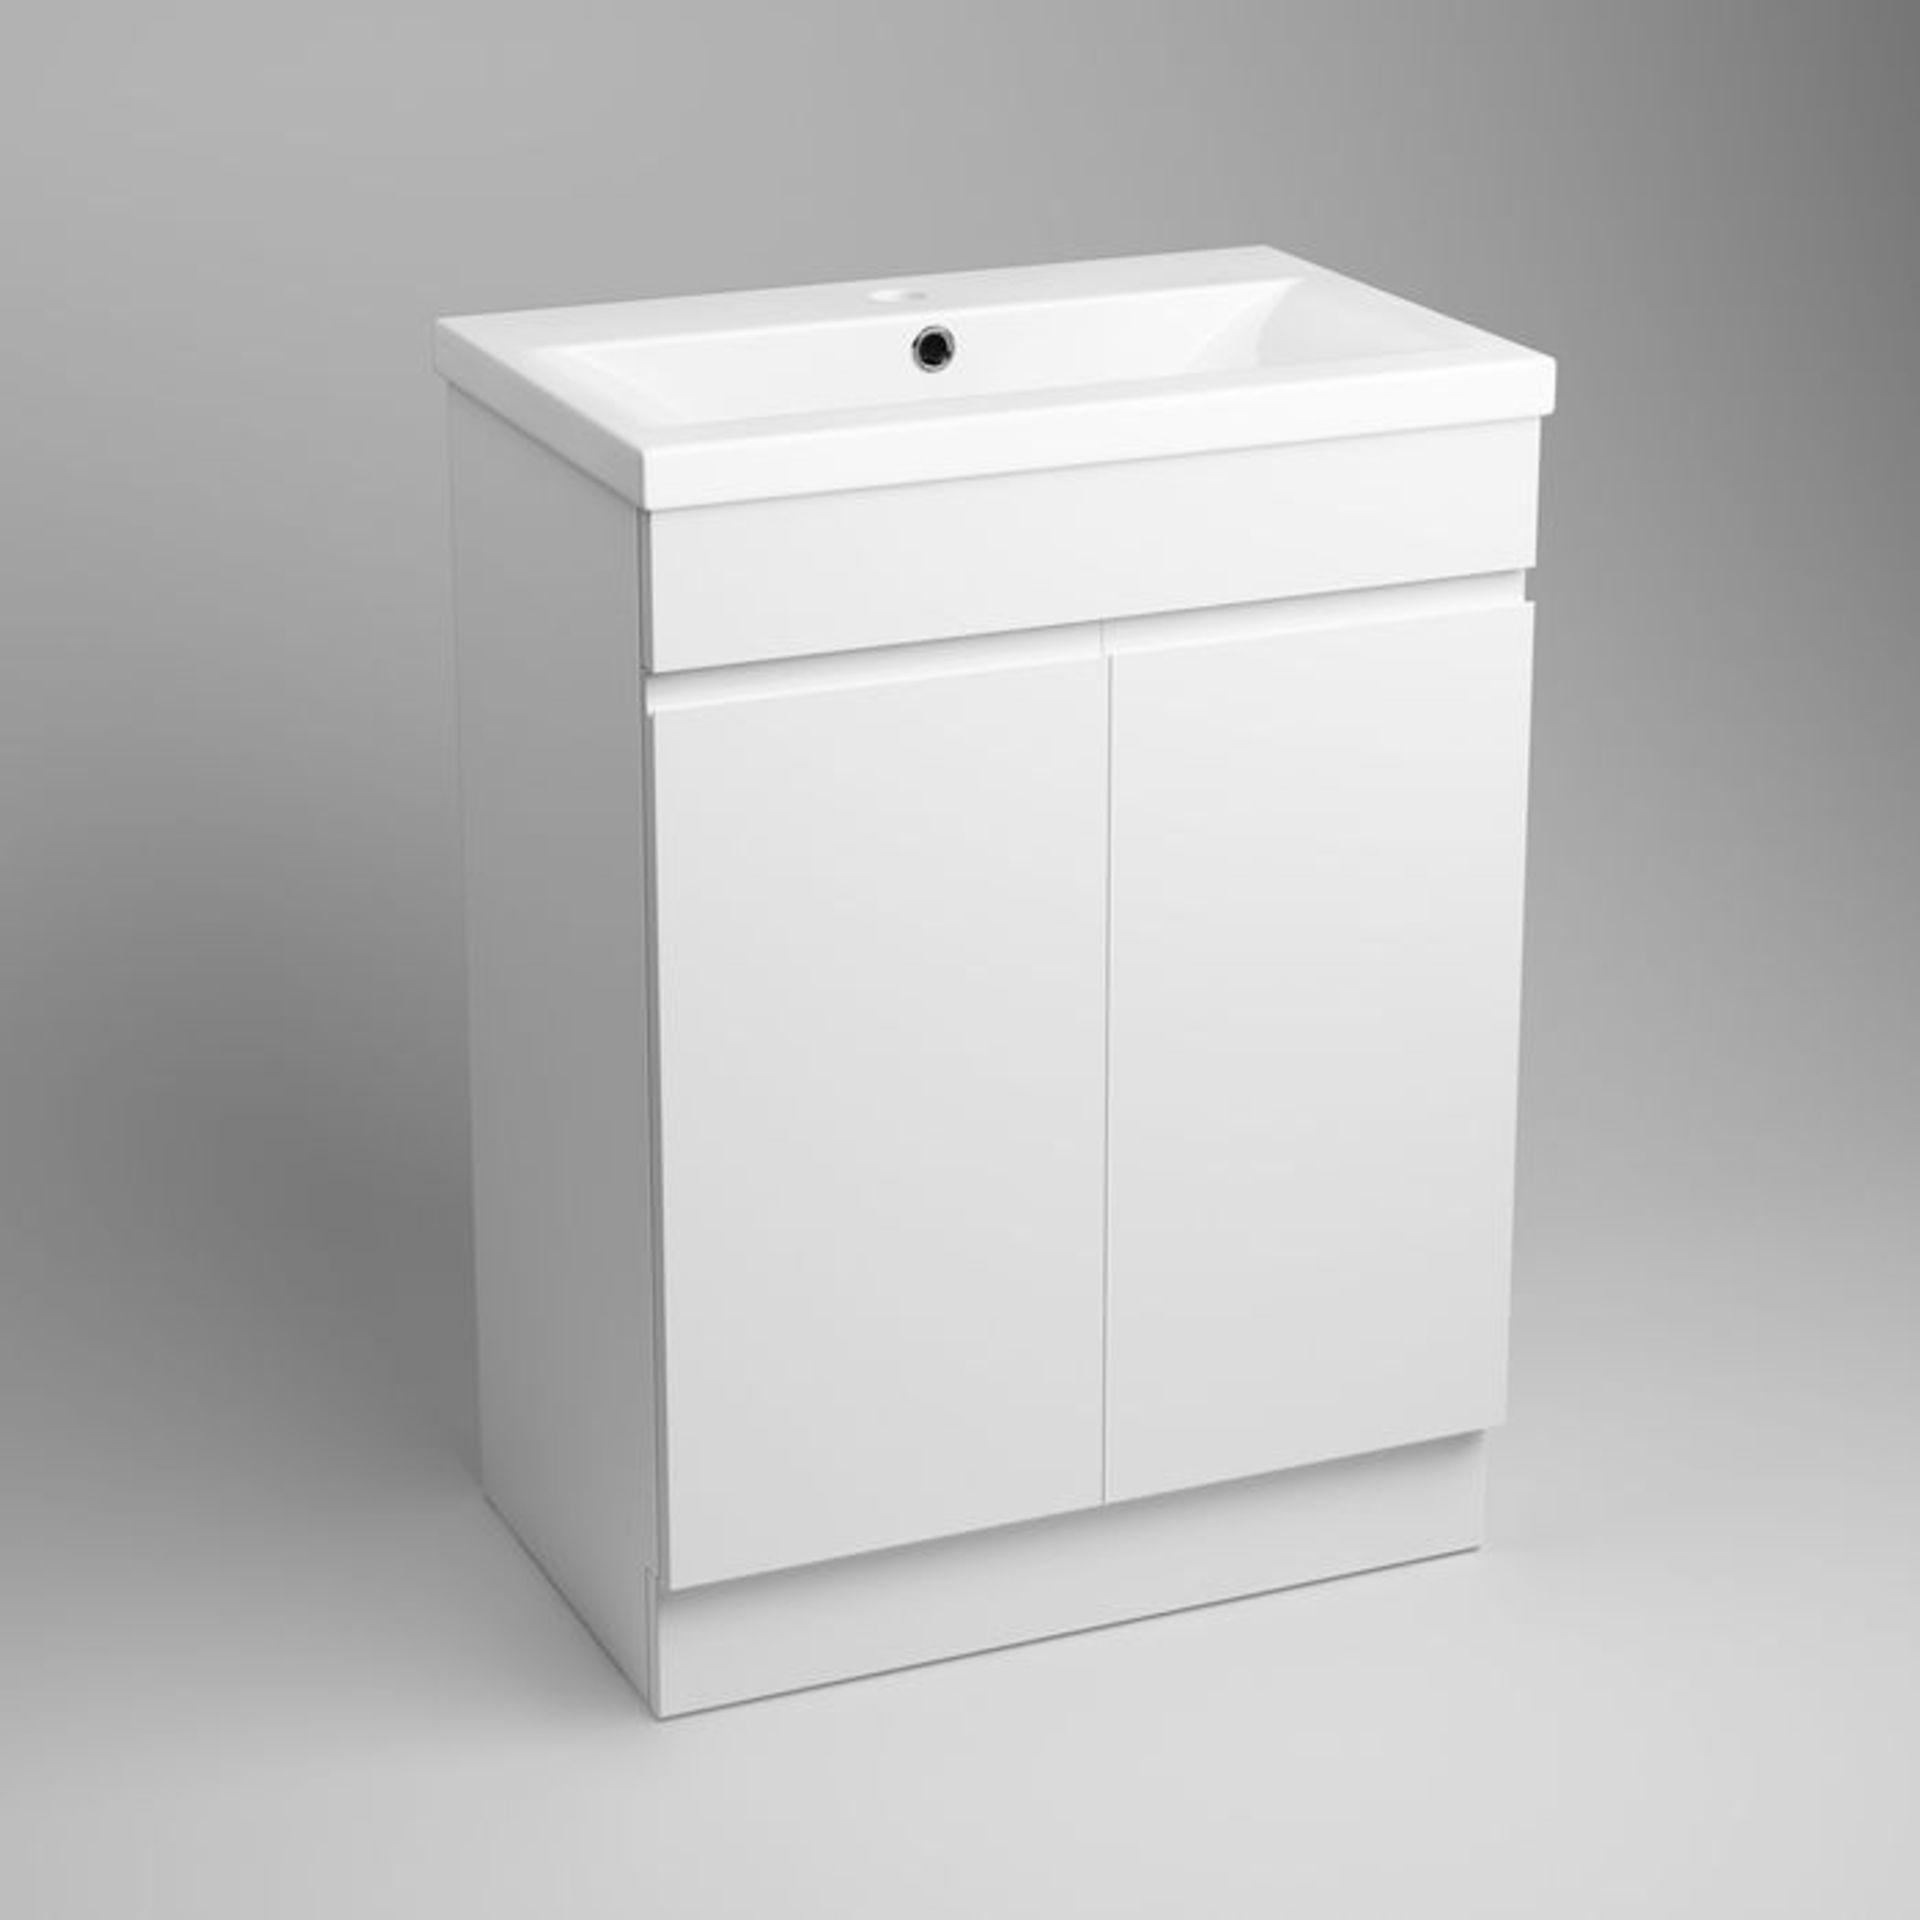 NEW BOXED 600mm Trent Gloss White Sink Cabinet - Floor Standing.RRP £499.99.Comes complete wit... - Image 4 of 4